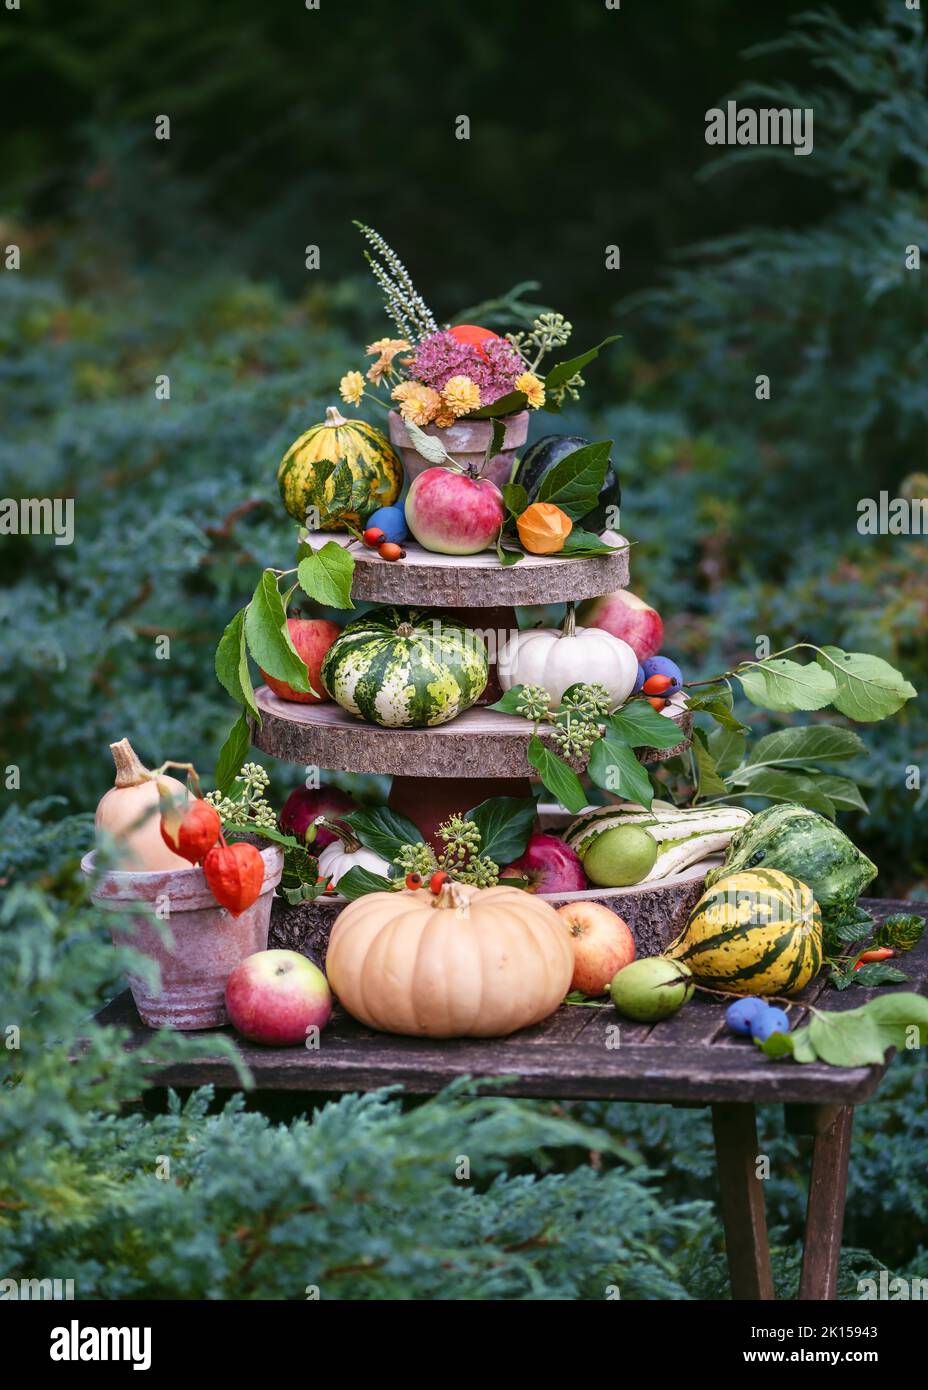 Beautiful autumn garden decoration with colorful squash, pumpkins, apples, plums, nuts and flowers on the wooden etagere. Stock Photo